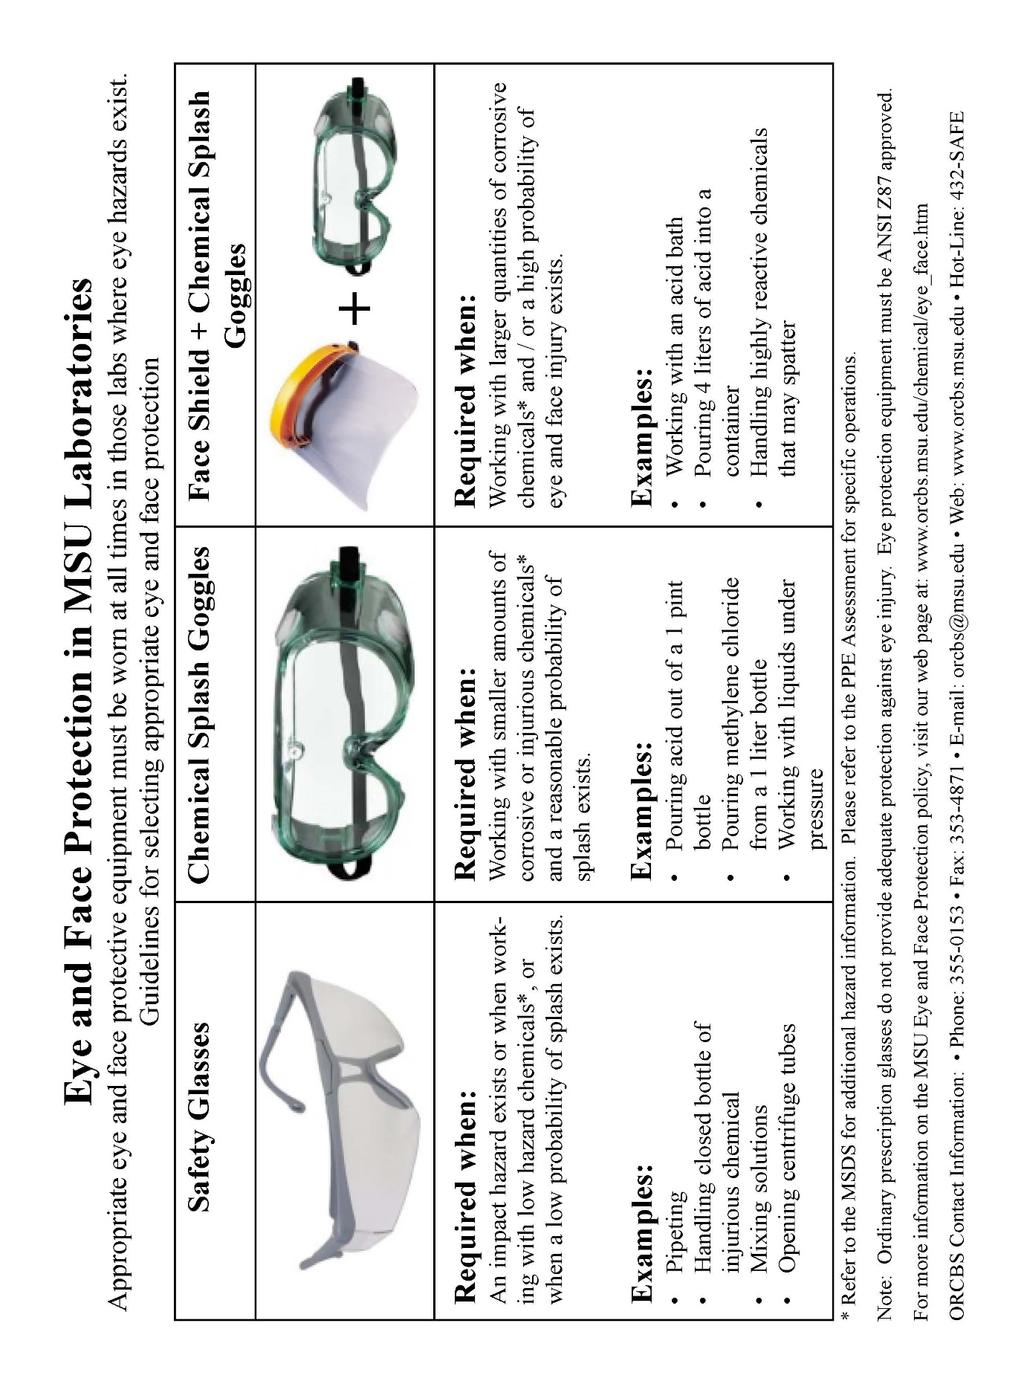 6.0 APPENDIX Figure 1 Eye and Face Protection Recommendations for MSU Laboratories The